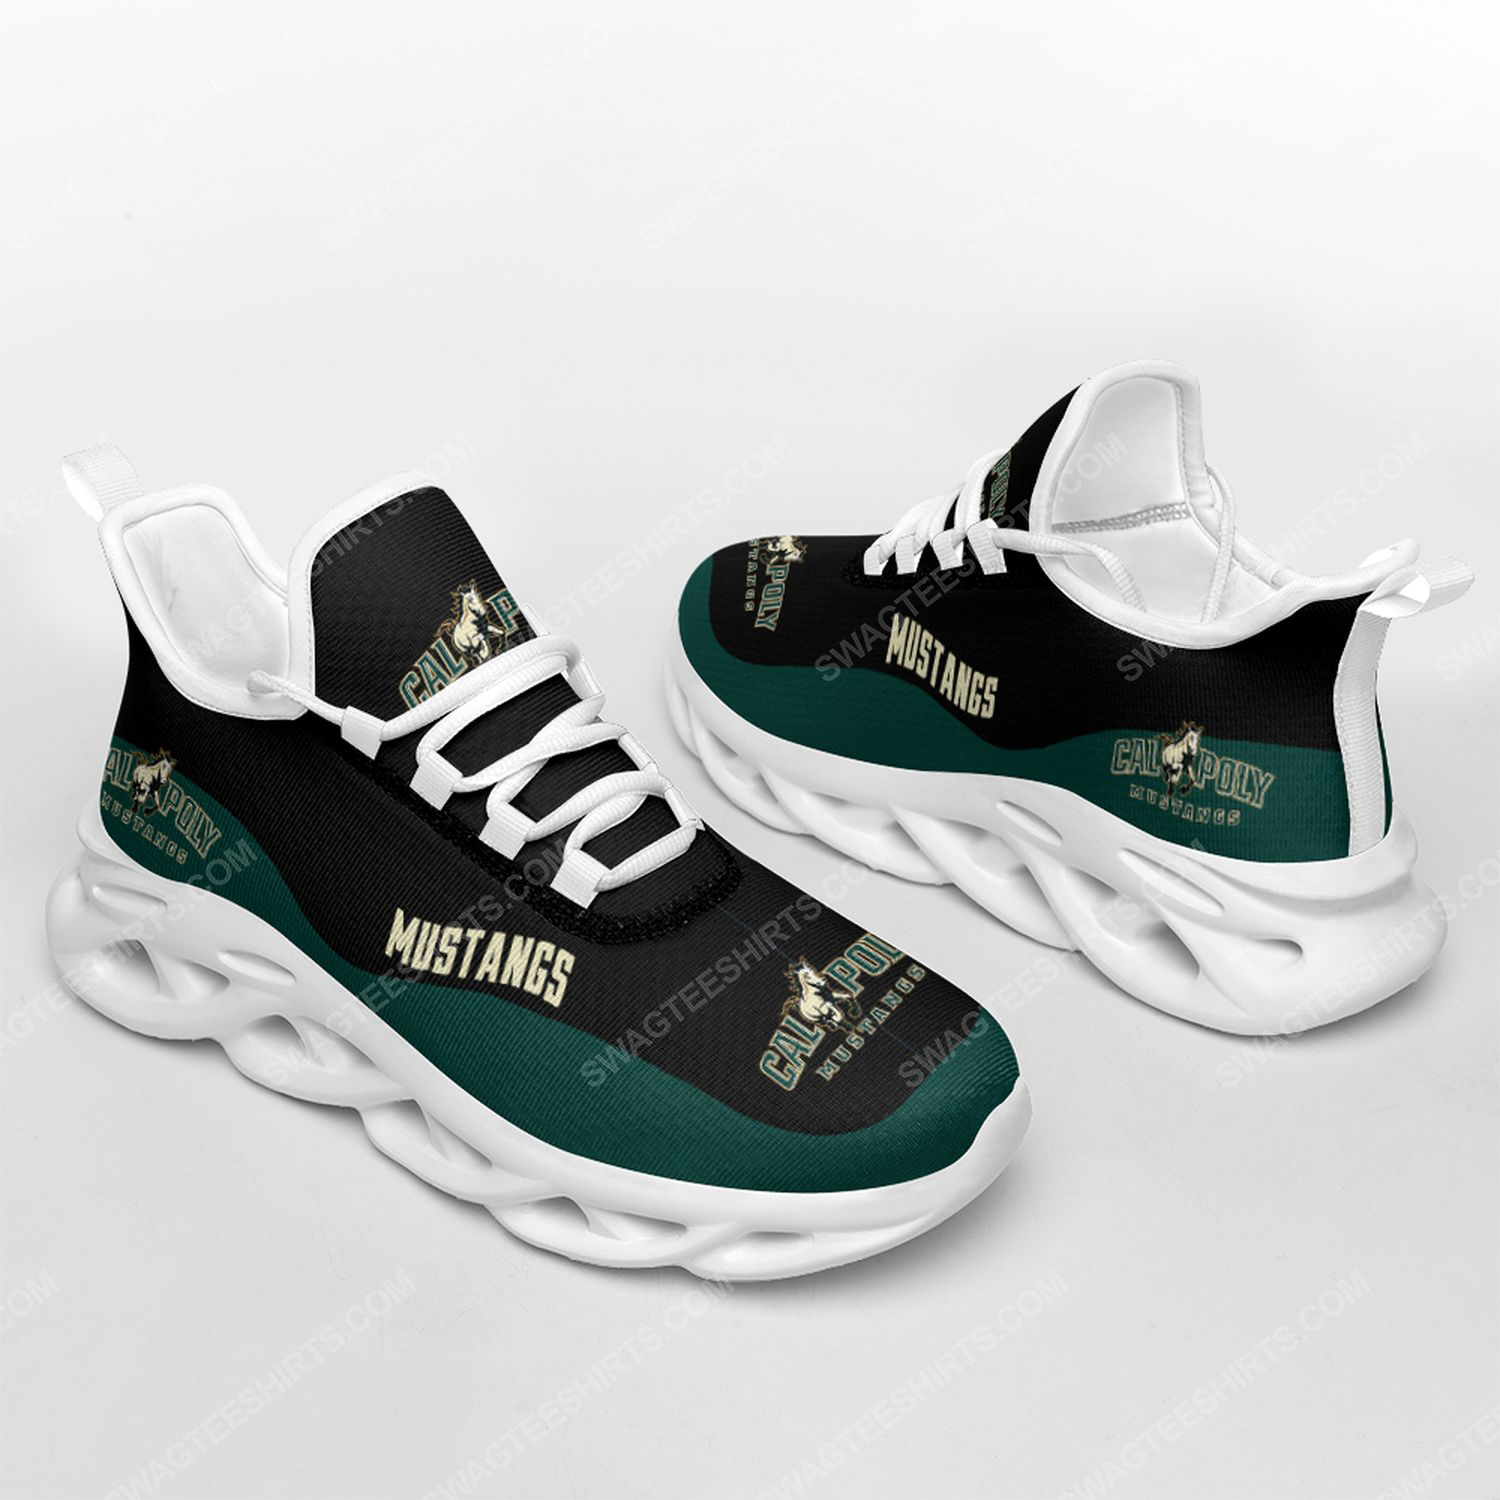 [special edition] The cal poly mustangs football team max soul shoes – Maria